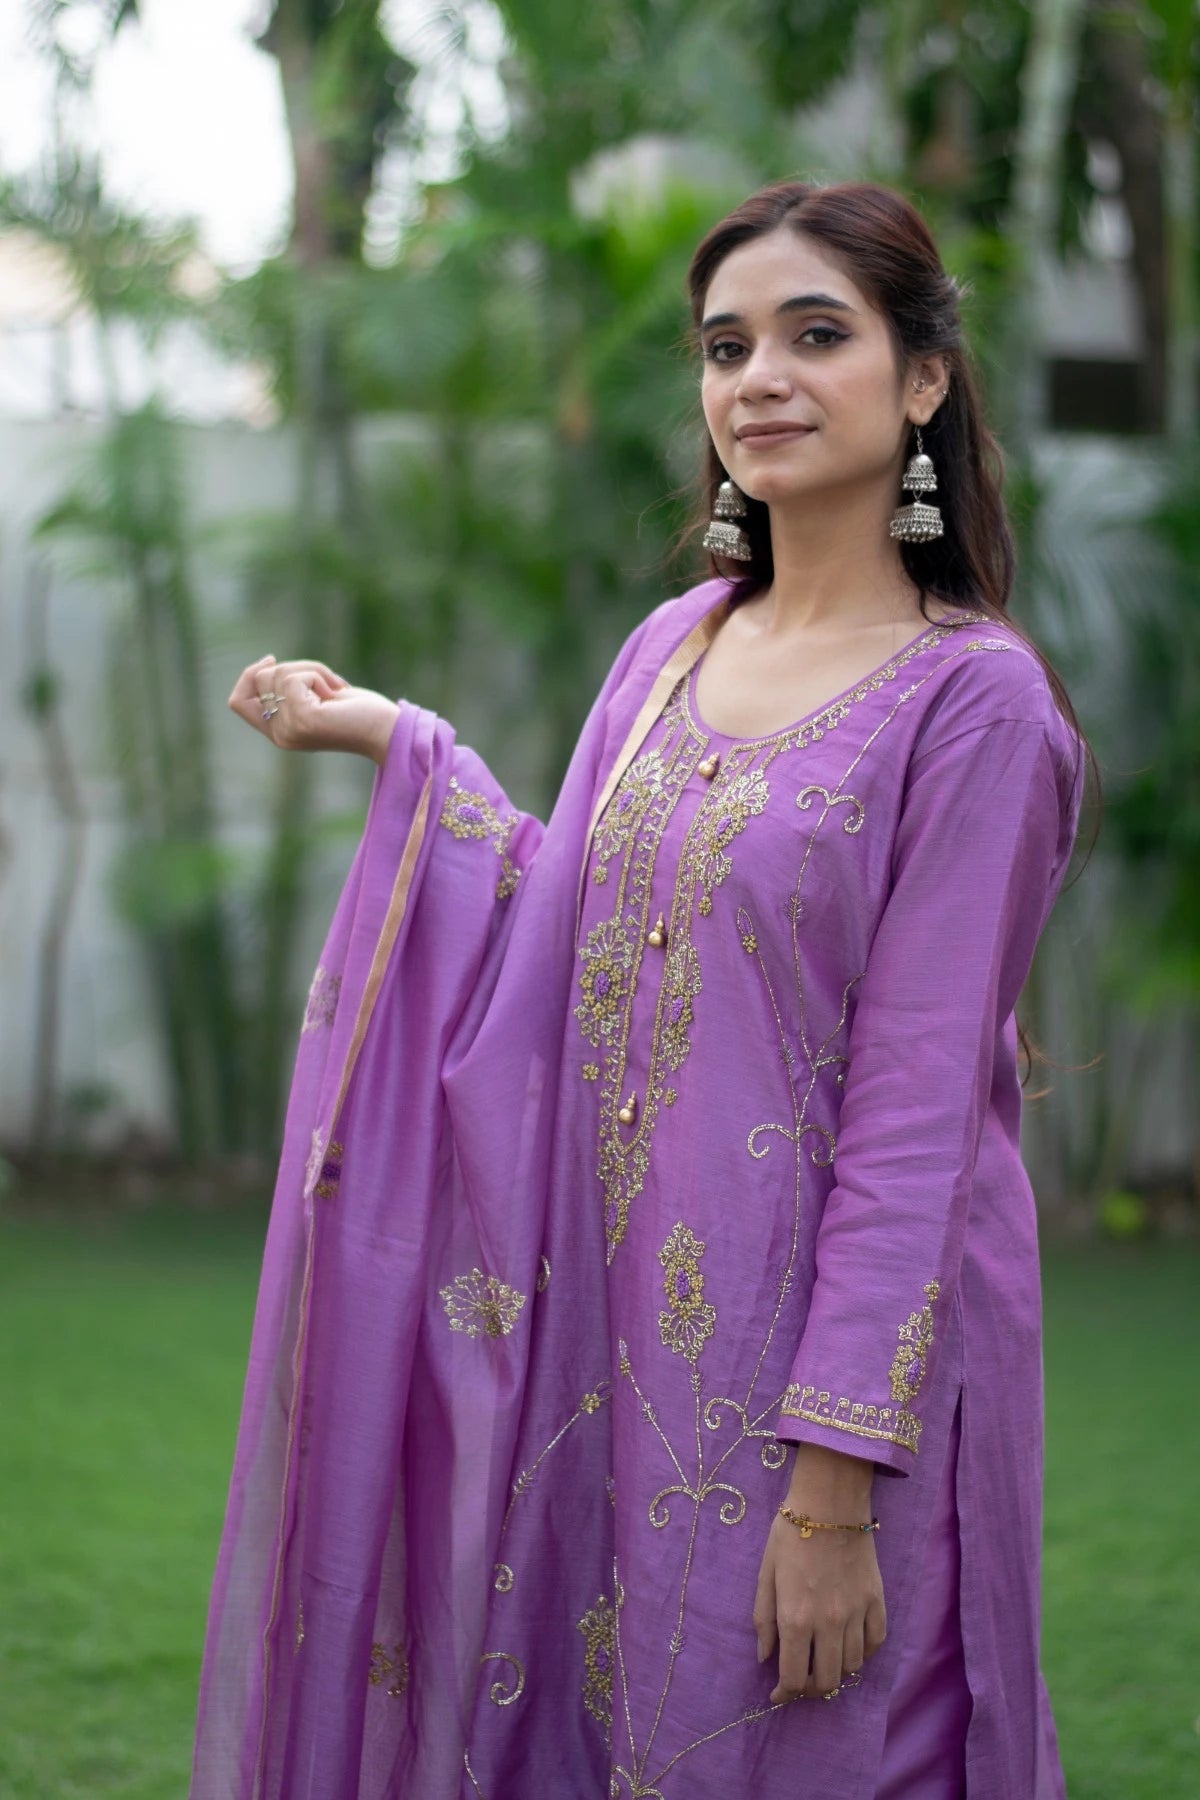 This image features a woman wearing a flowing purple lilac kurta with comfortable, loose-fitting trousers.